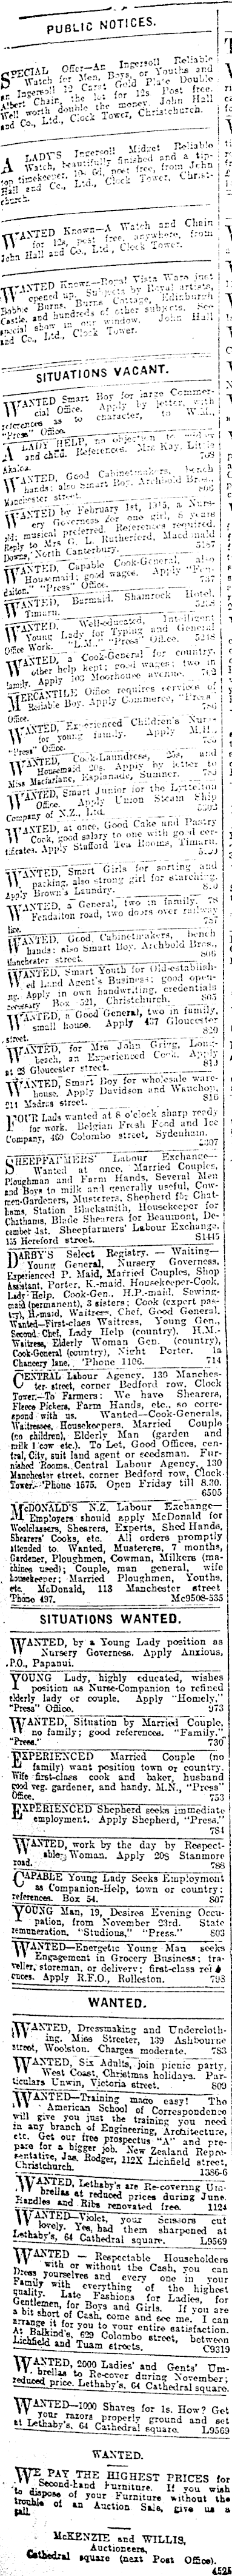 Papers Past Newspapers Press 19 November 1914 Page 11 Advertisements Column 1